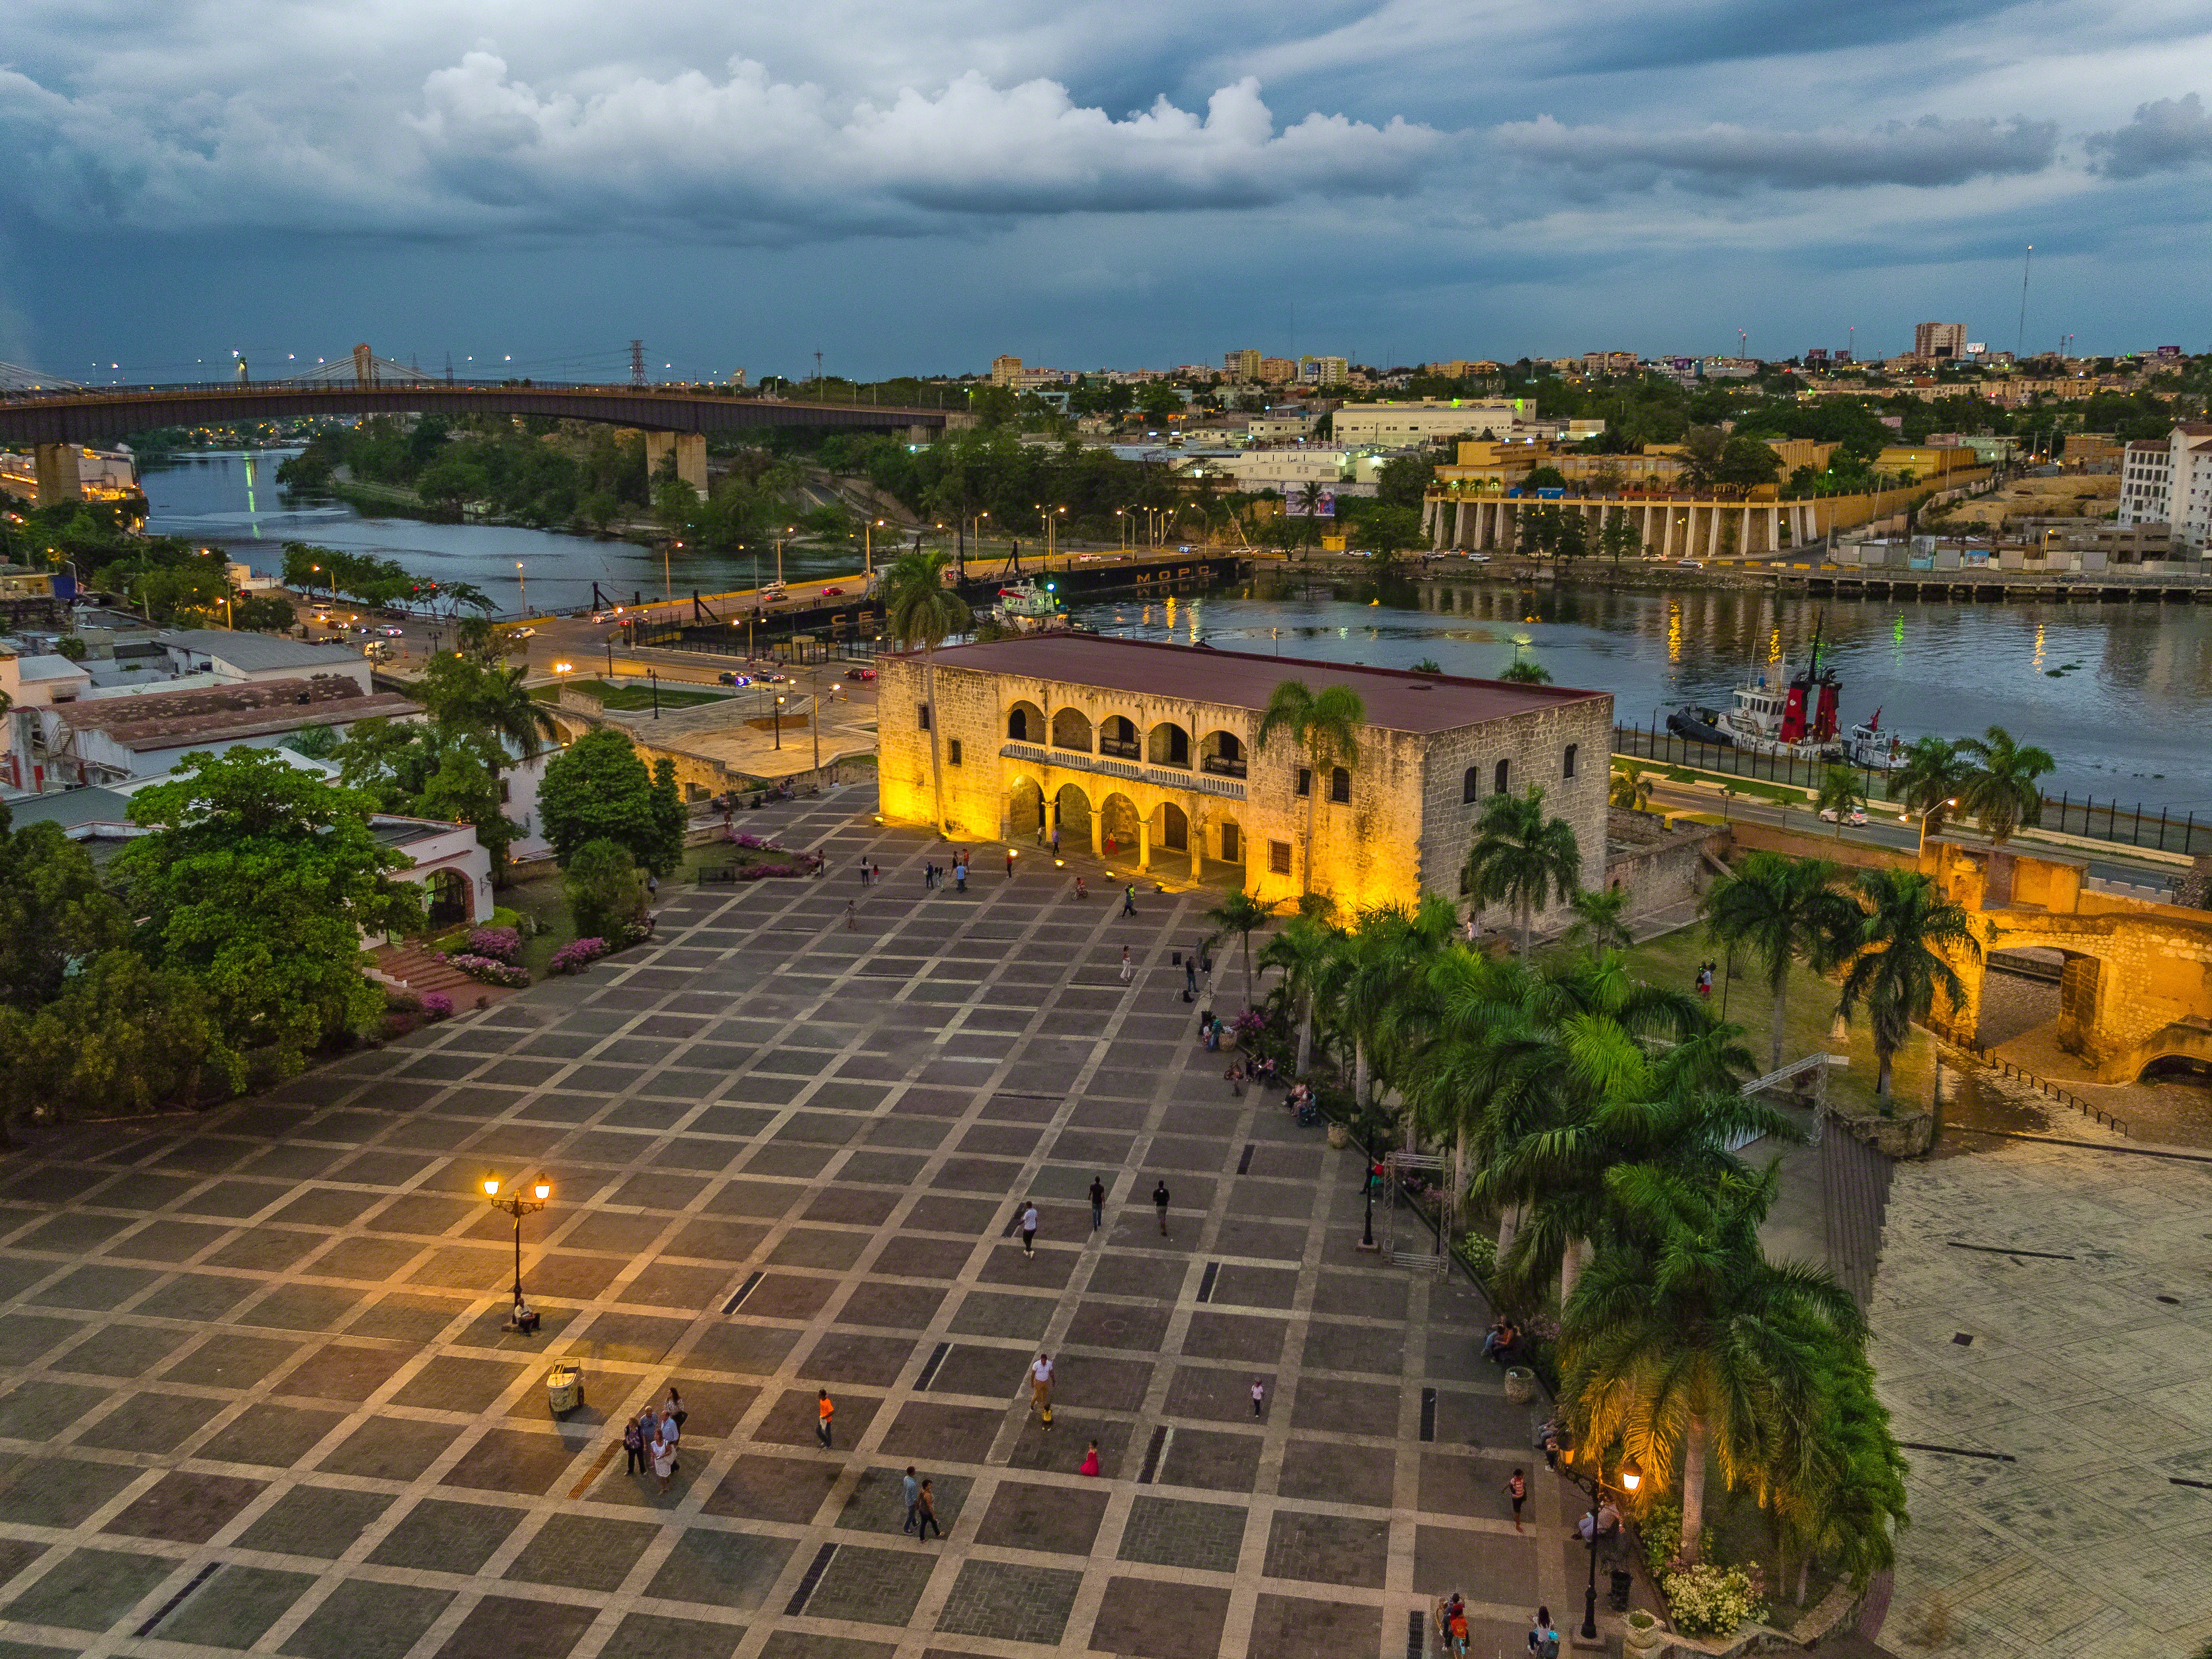 With Spanish architecture, ancient ruins and cobblestone streets, Santo Domingo is a must-visit for history lovers